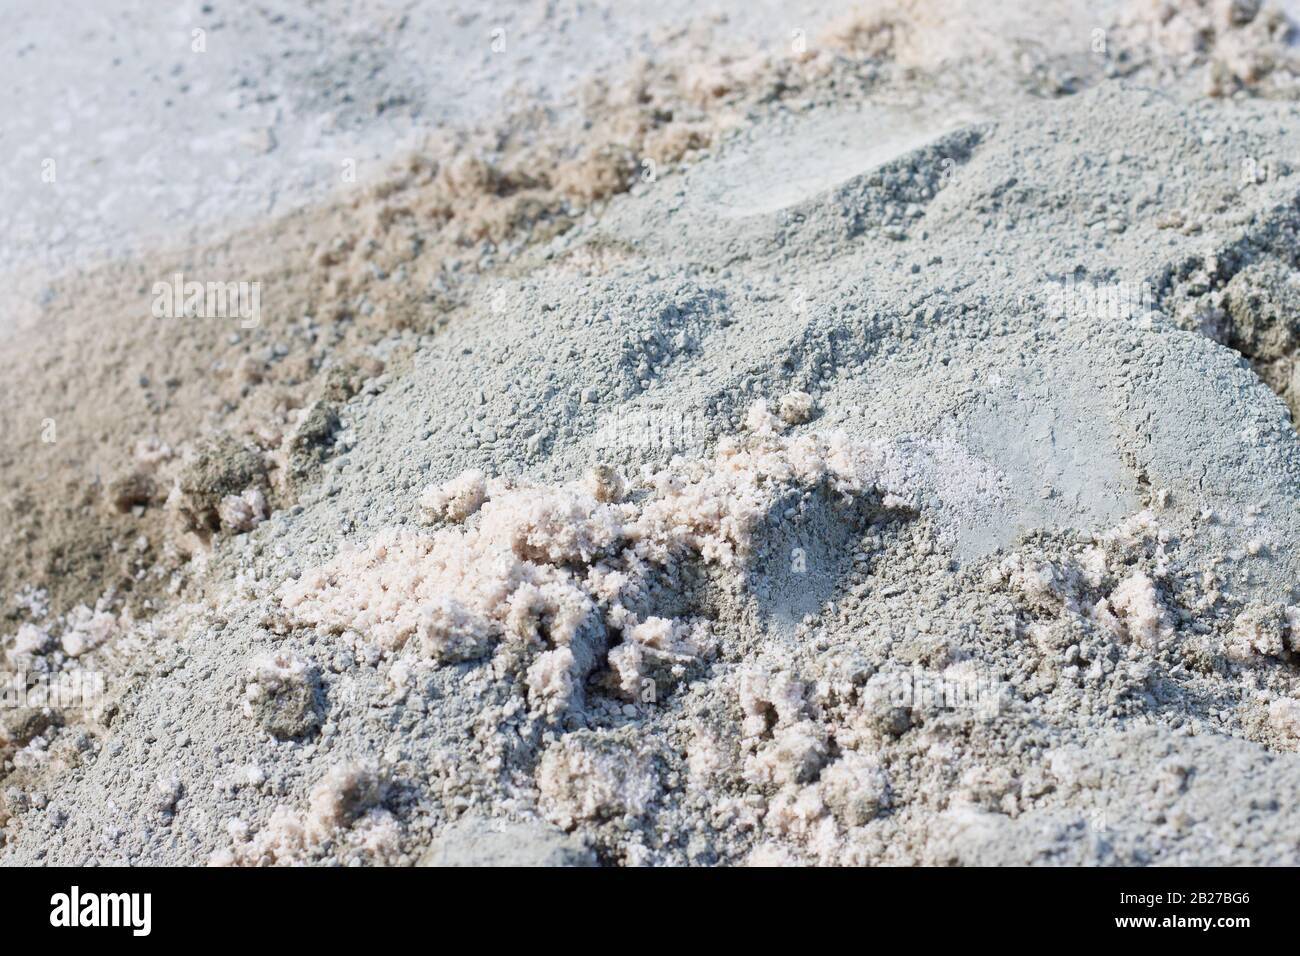 Dry mix of Portland cement and sea sand partially mixed on a hot bright day Stock Photo